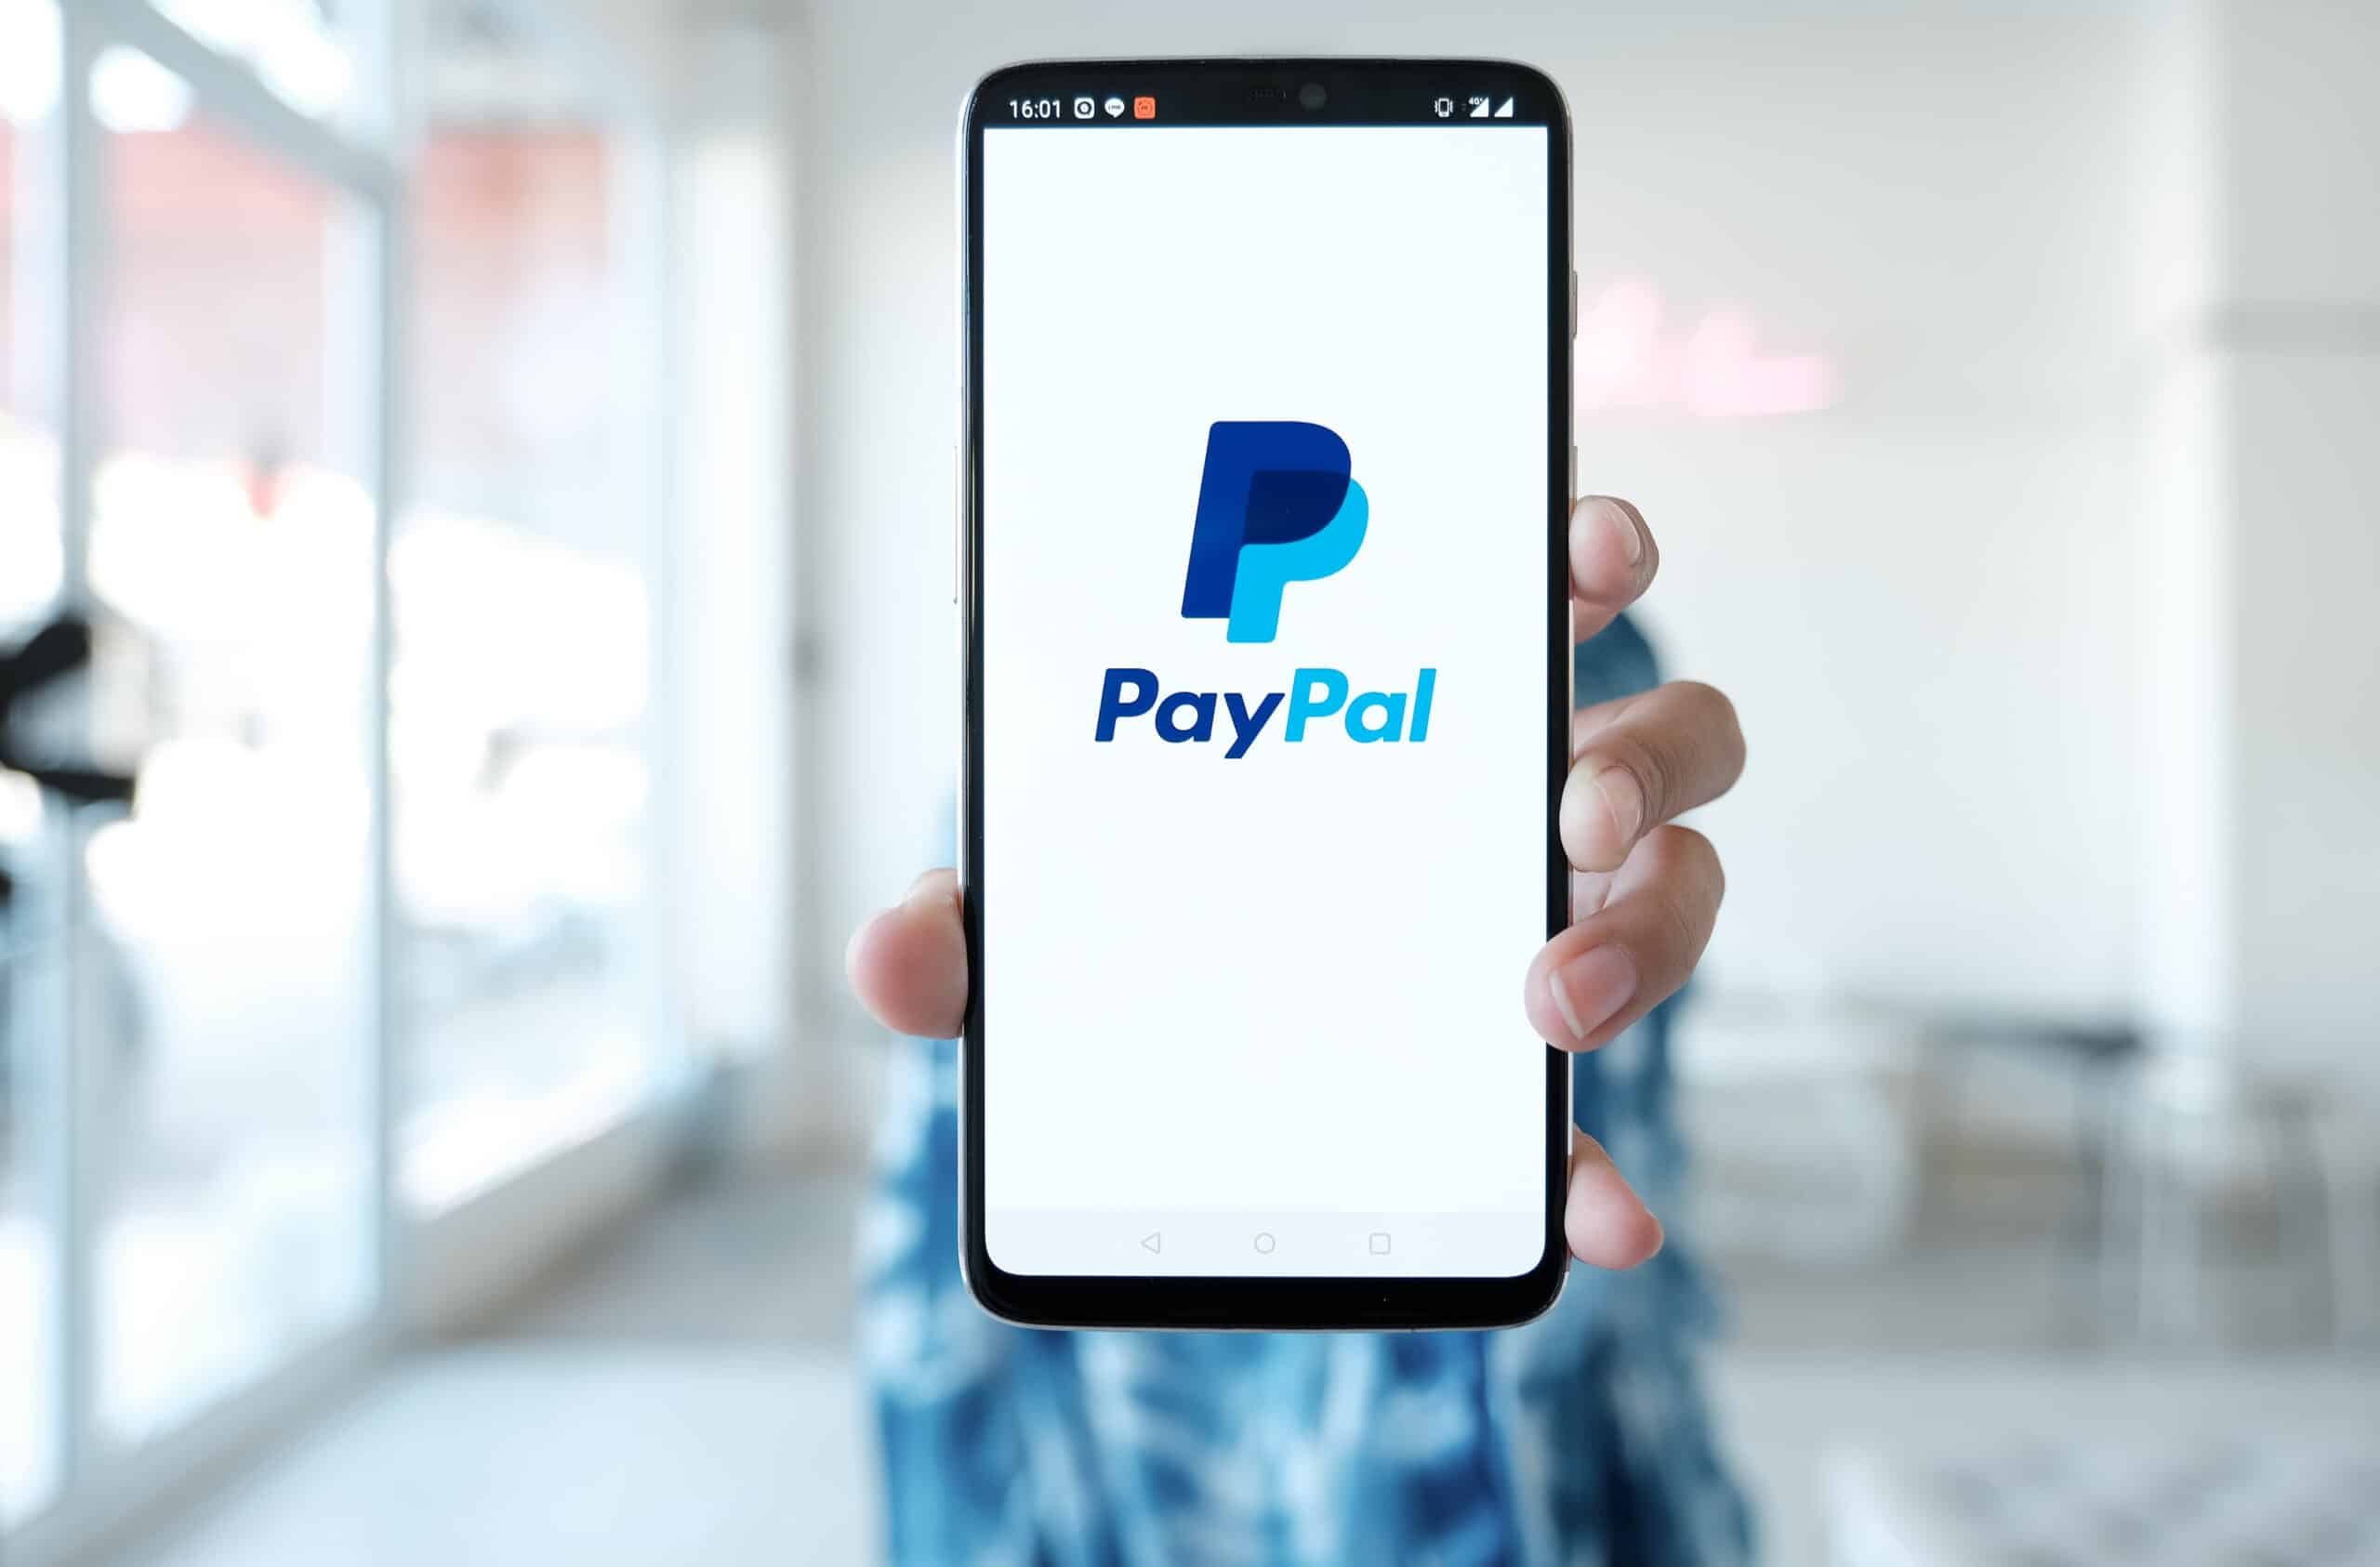 paypal app on mobile phone